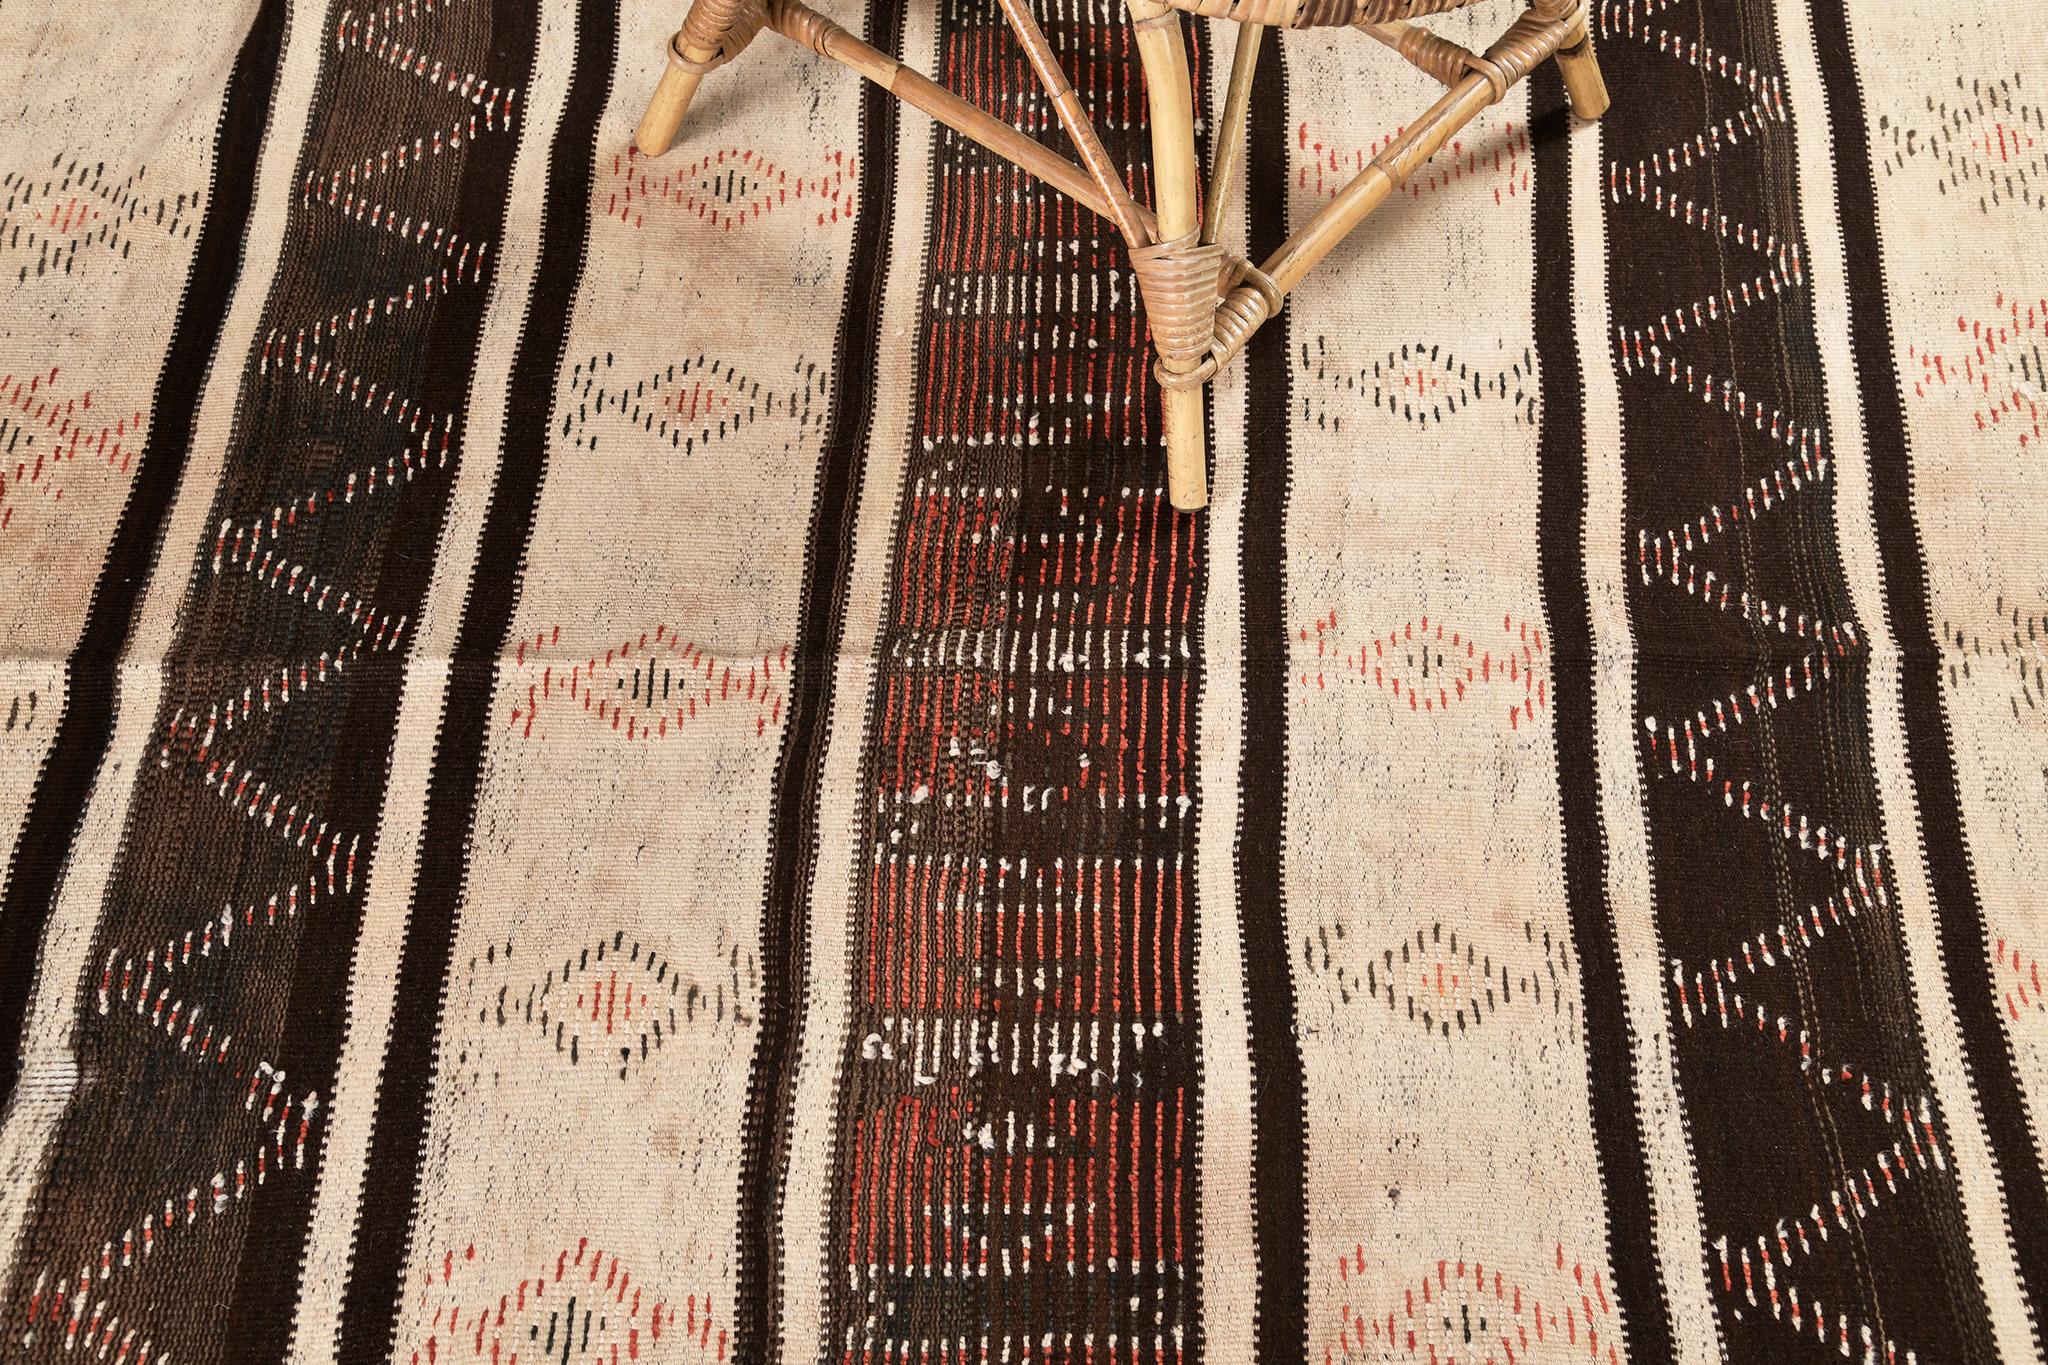 Banded flatweave in alternating natural brown and ivory. The piece is embellished with a knotted pile pattern in coral, pink, ivory, and apricot, tempered by irregularities of age.  A unique vintage tribal rug from the Atlas Mountains of Morocco.
